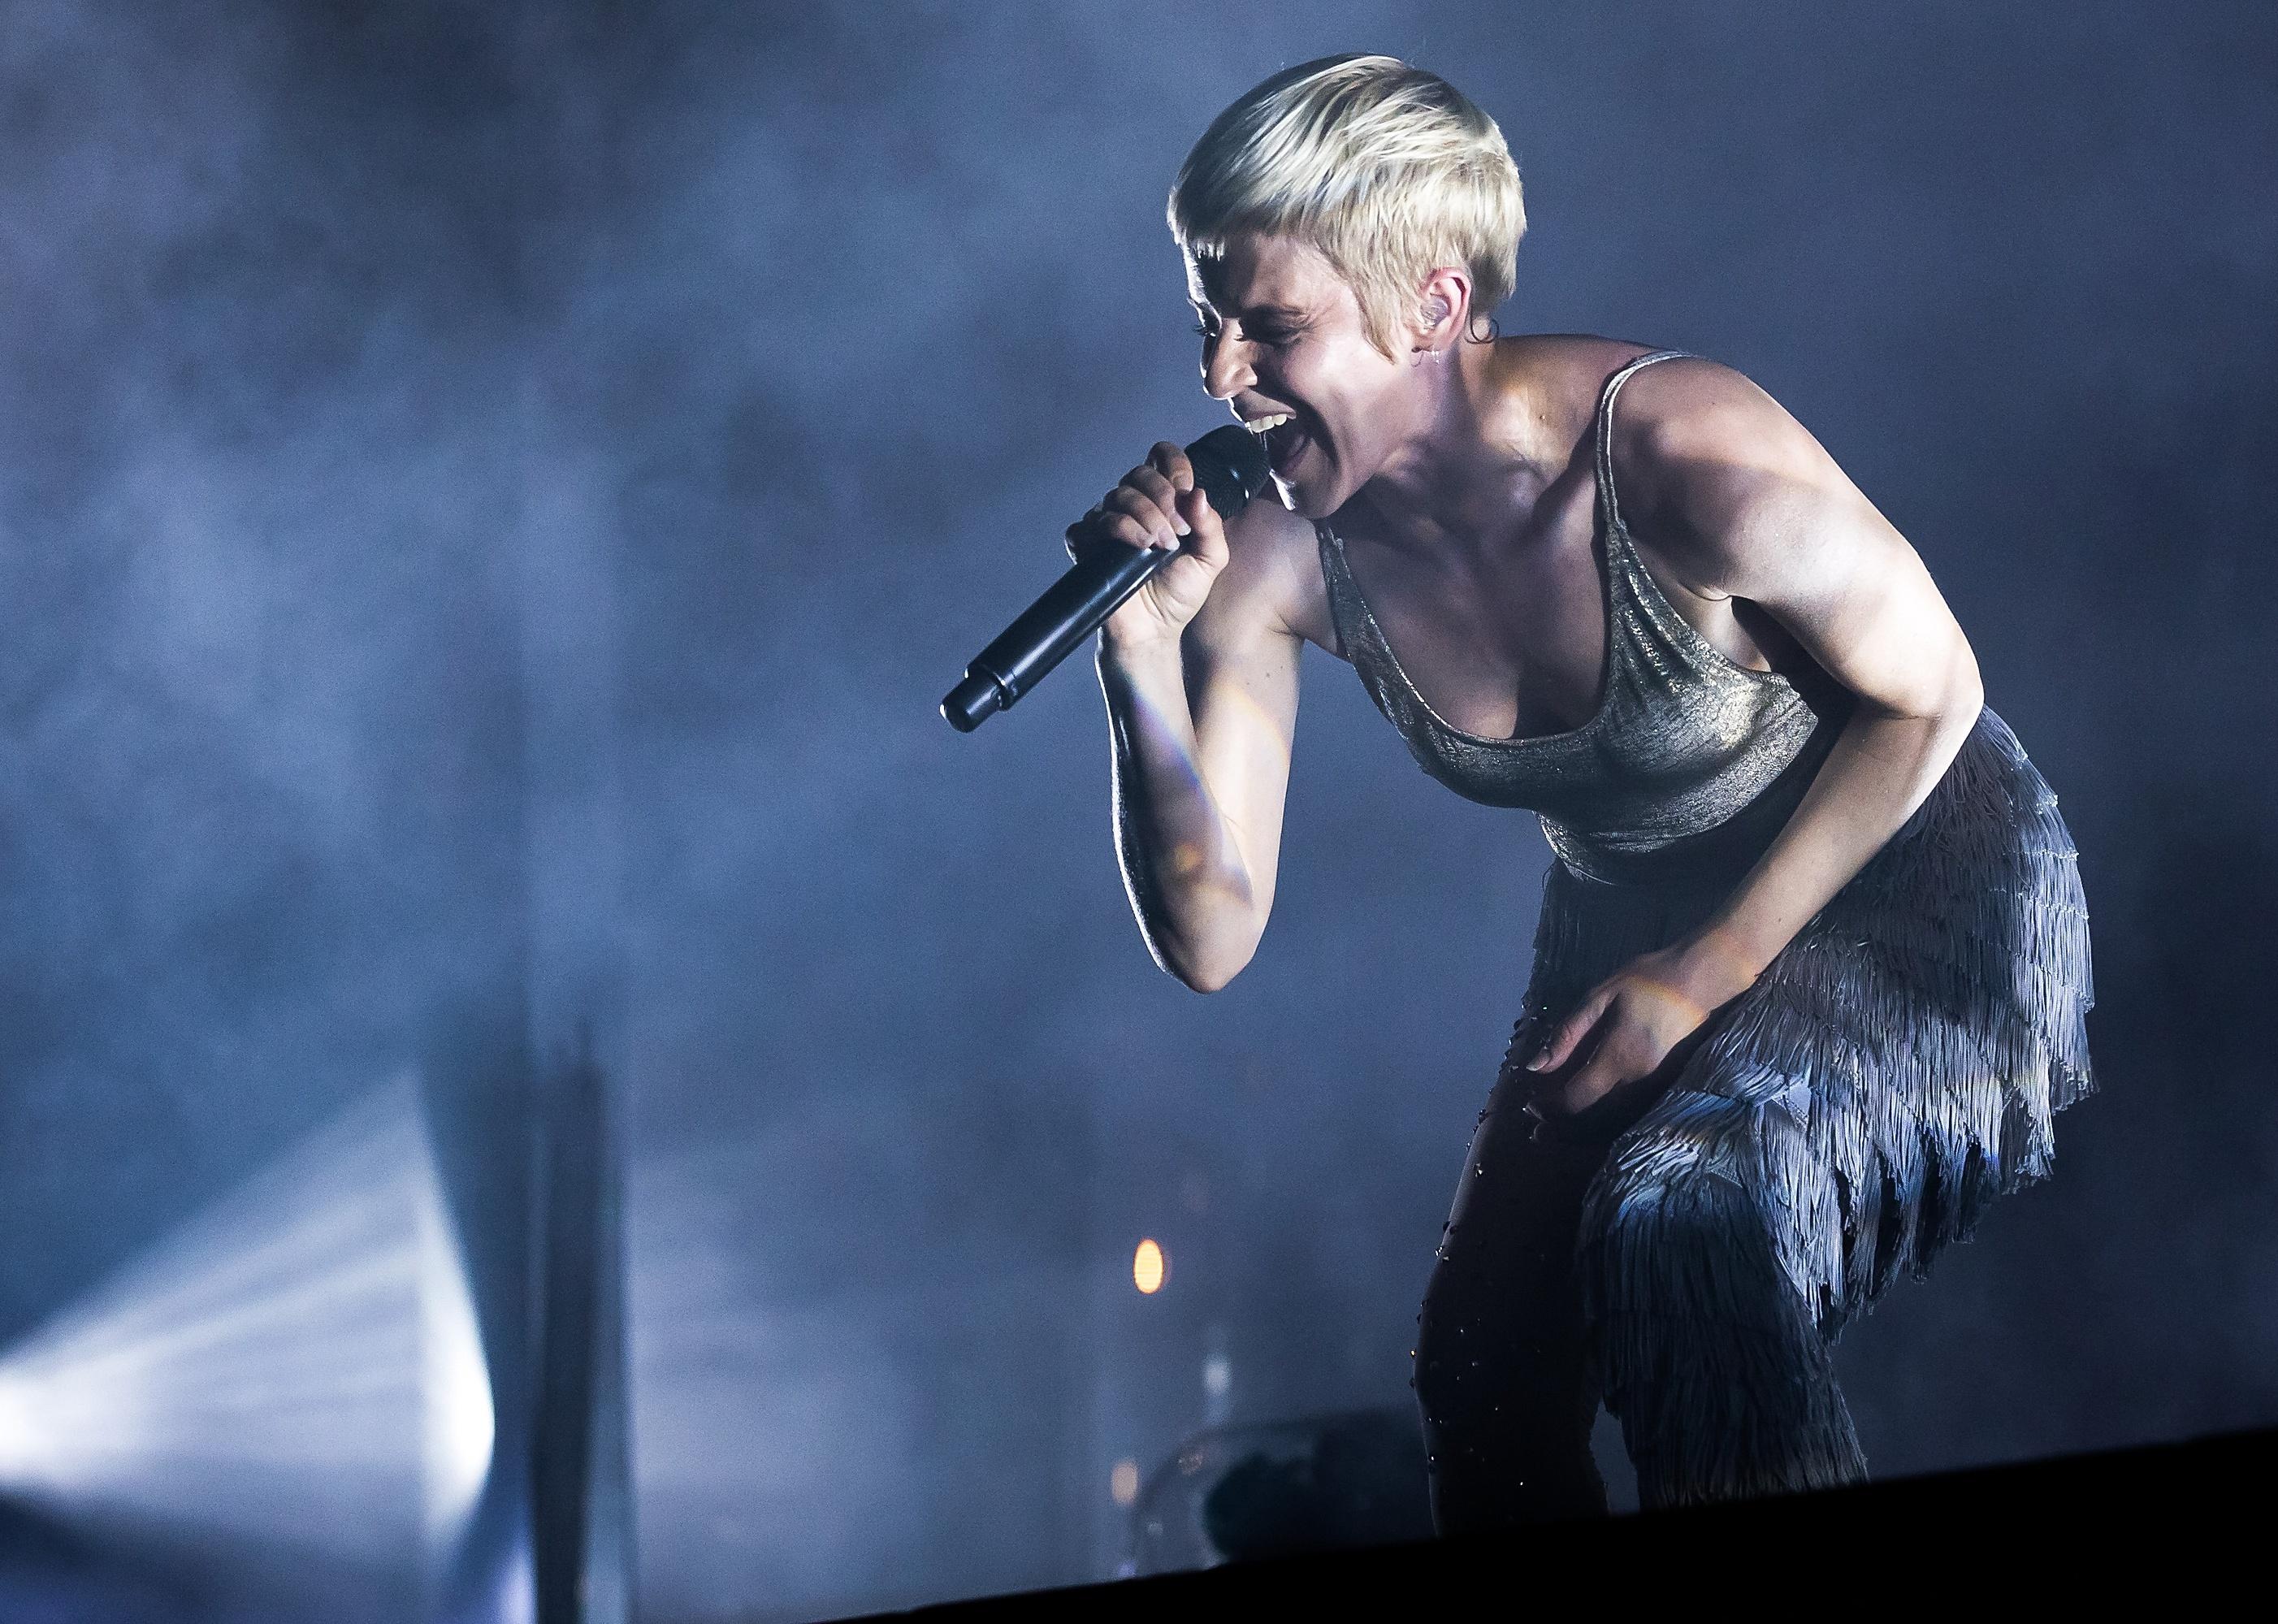 Robyn performing onstage.